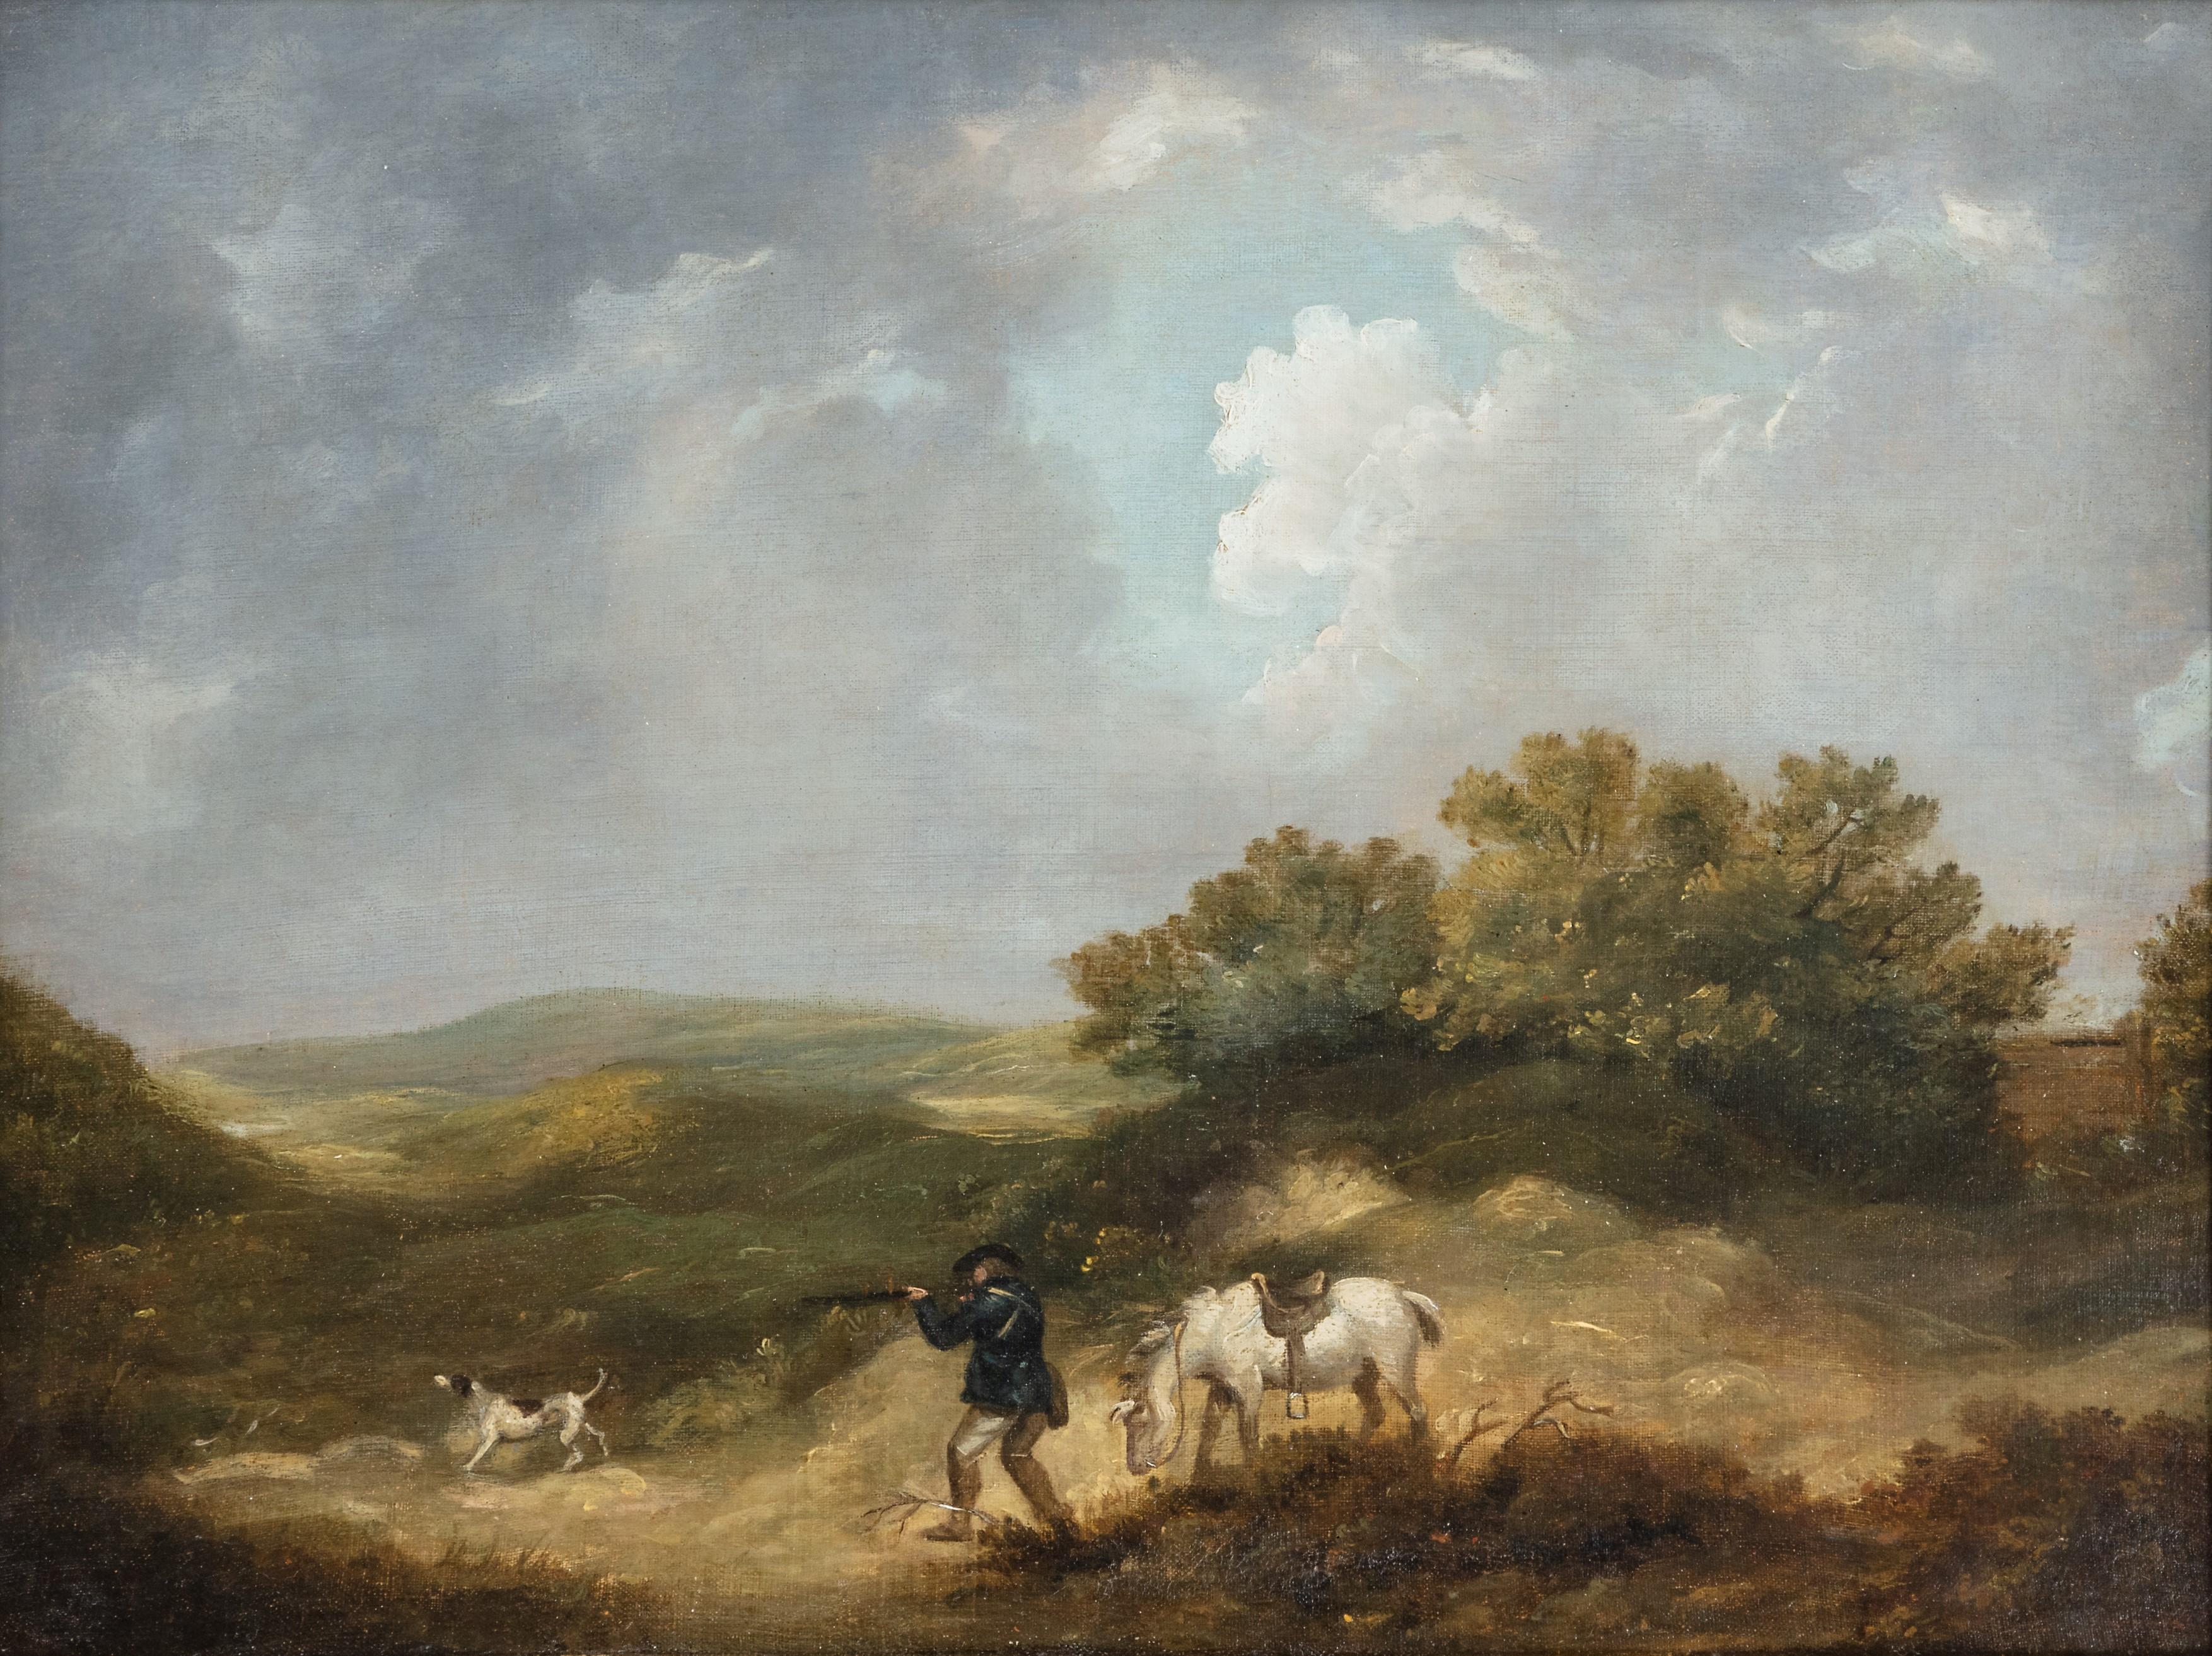 A gentleman shooting in a landscape, with his horse and dog - Painting by George Morland